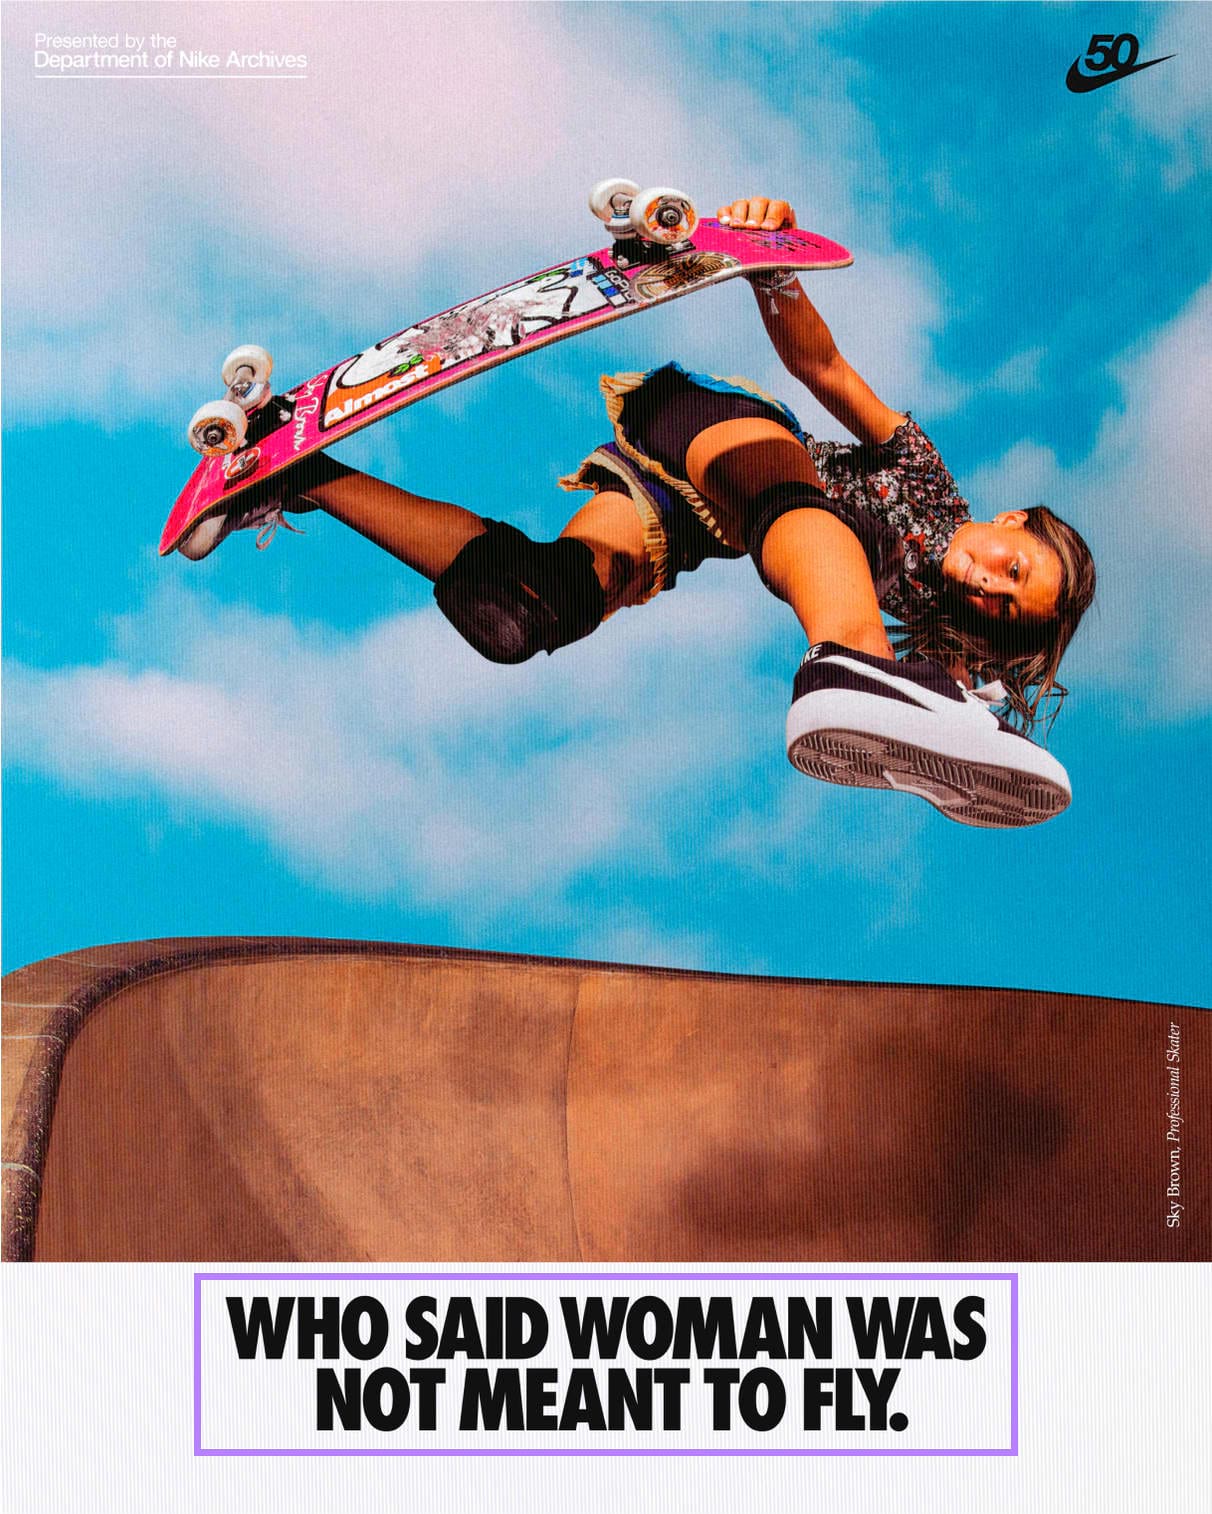 An ad from Nike campaign featuring a **** on a skate with "who said woman was not meant to fly." copy